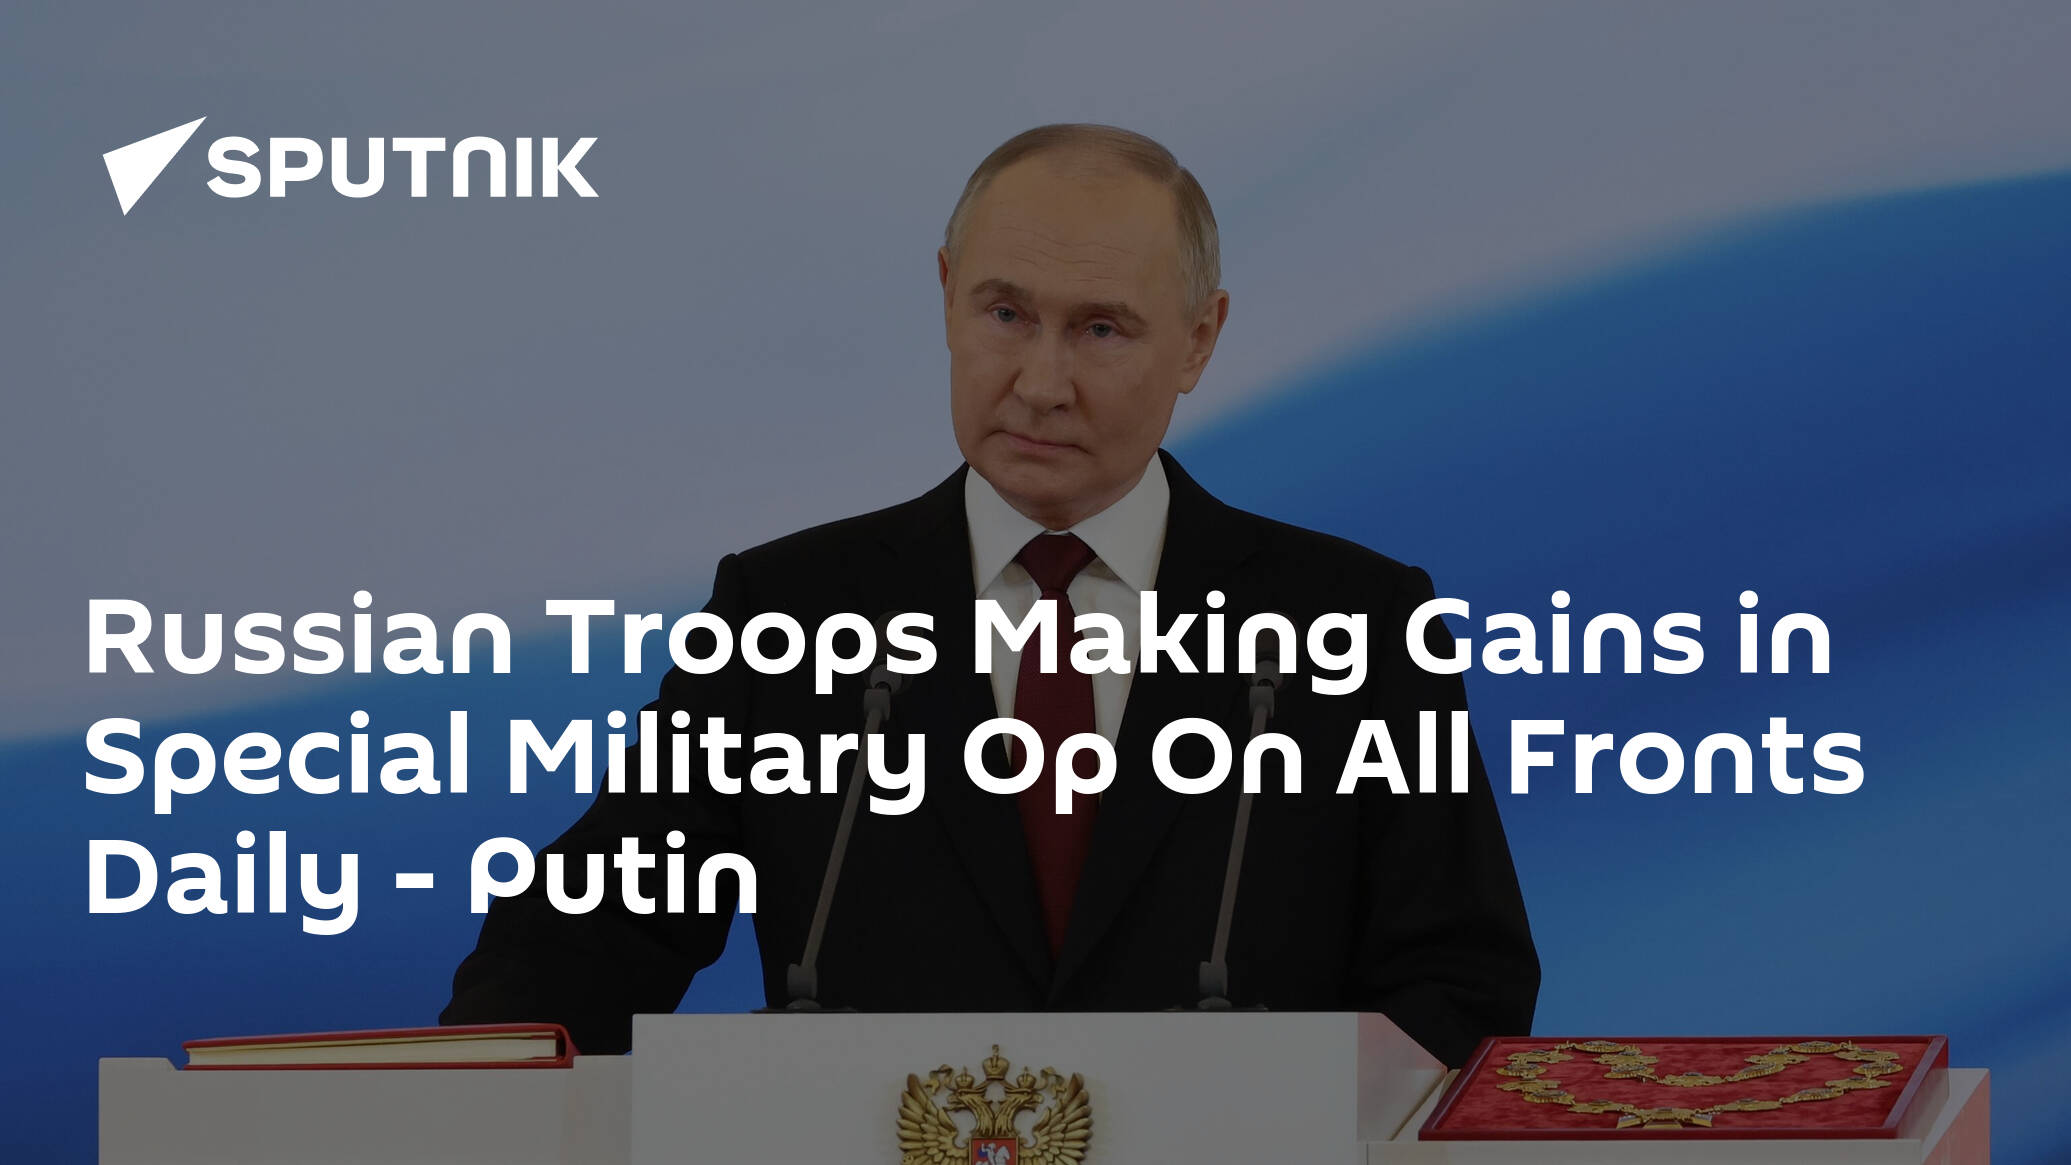 Russian Troops Making Gains in Special Military Op On All Fronts Daily – Putin